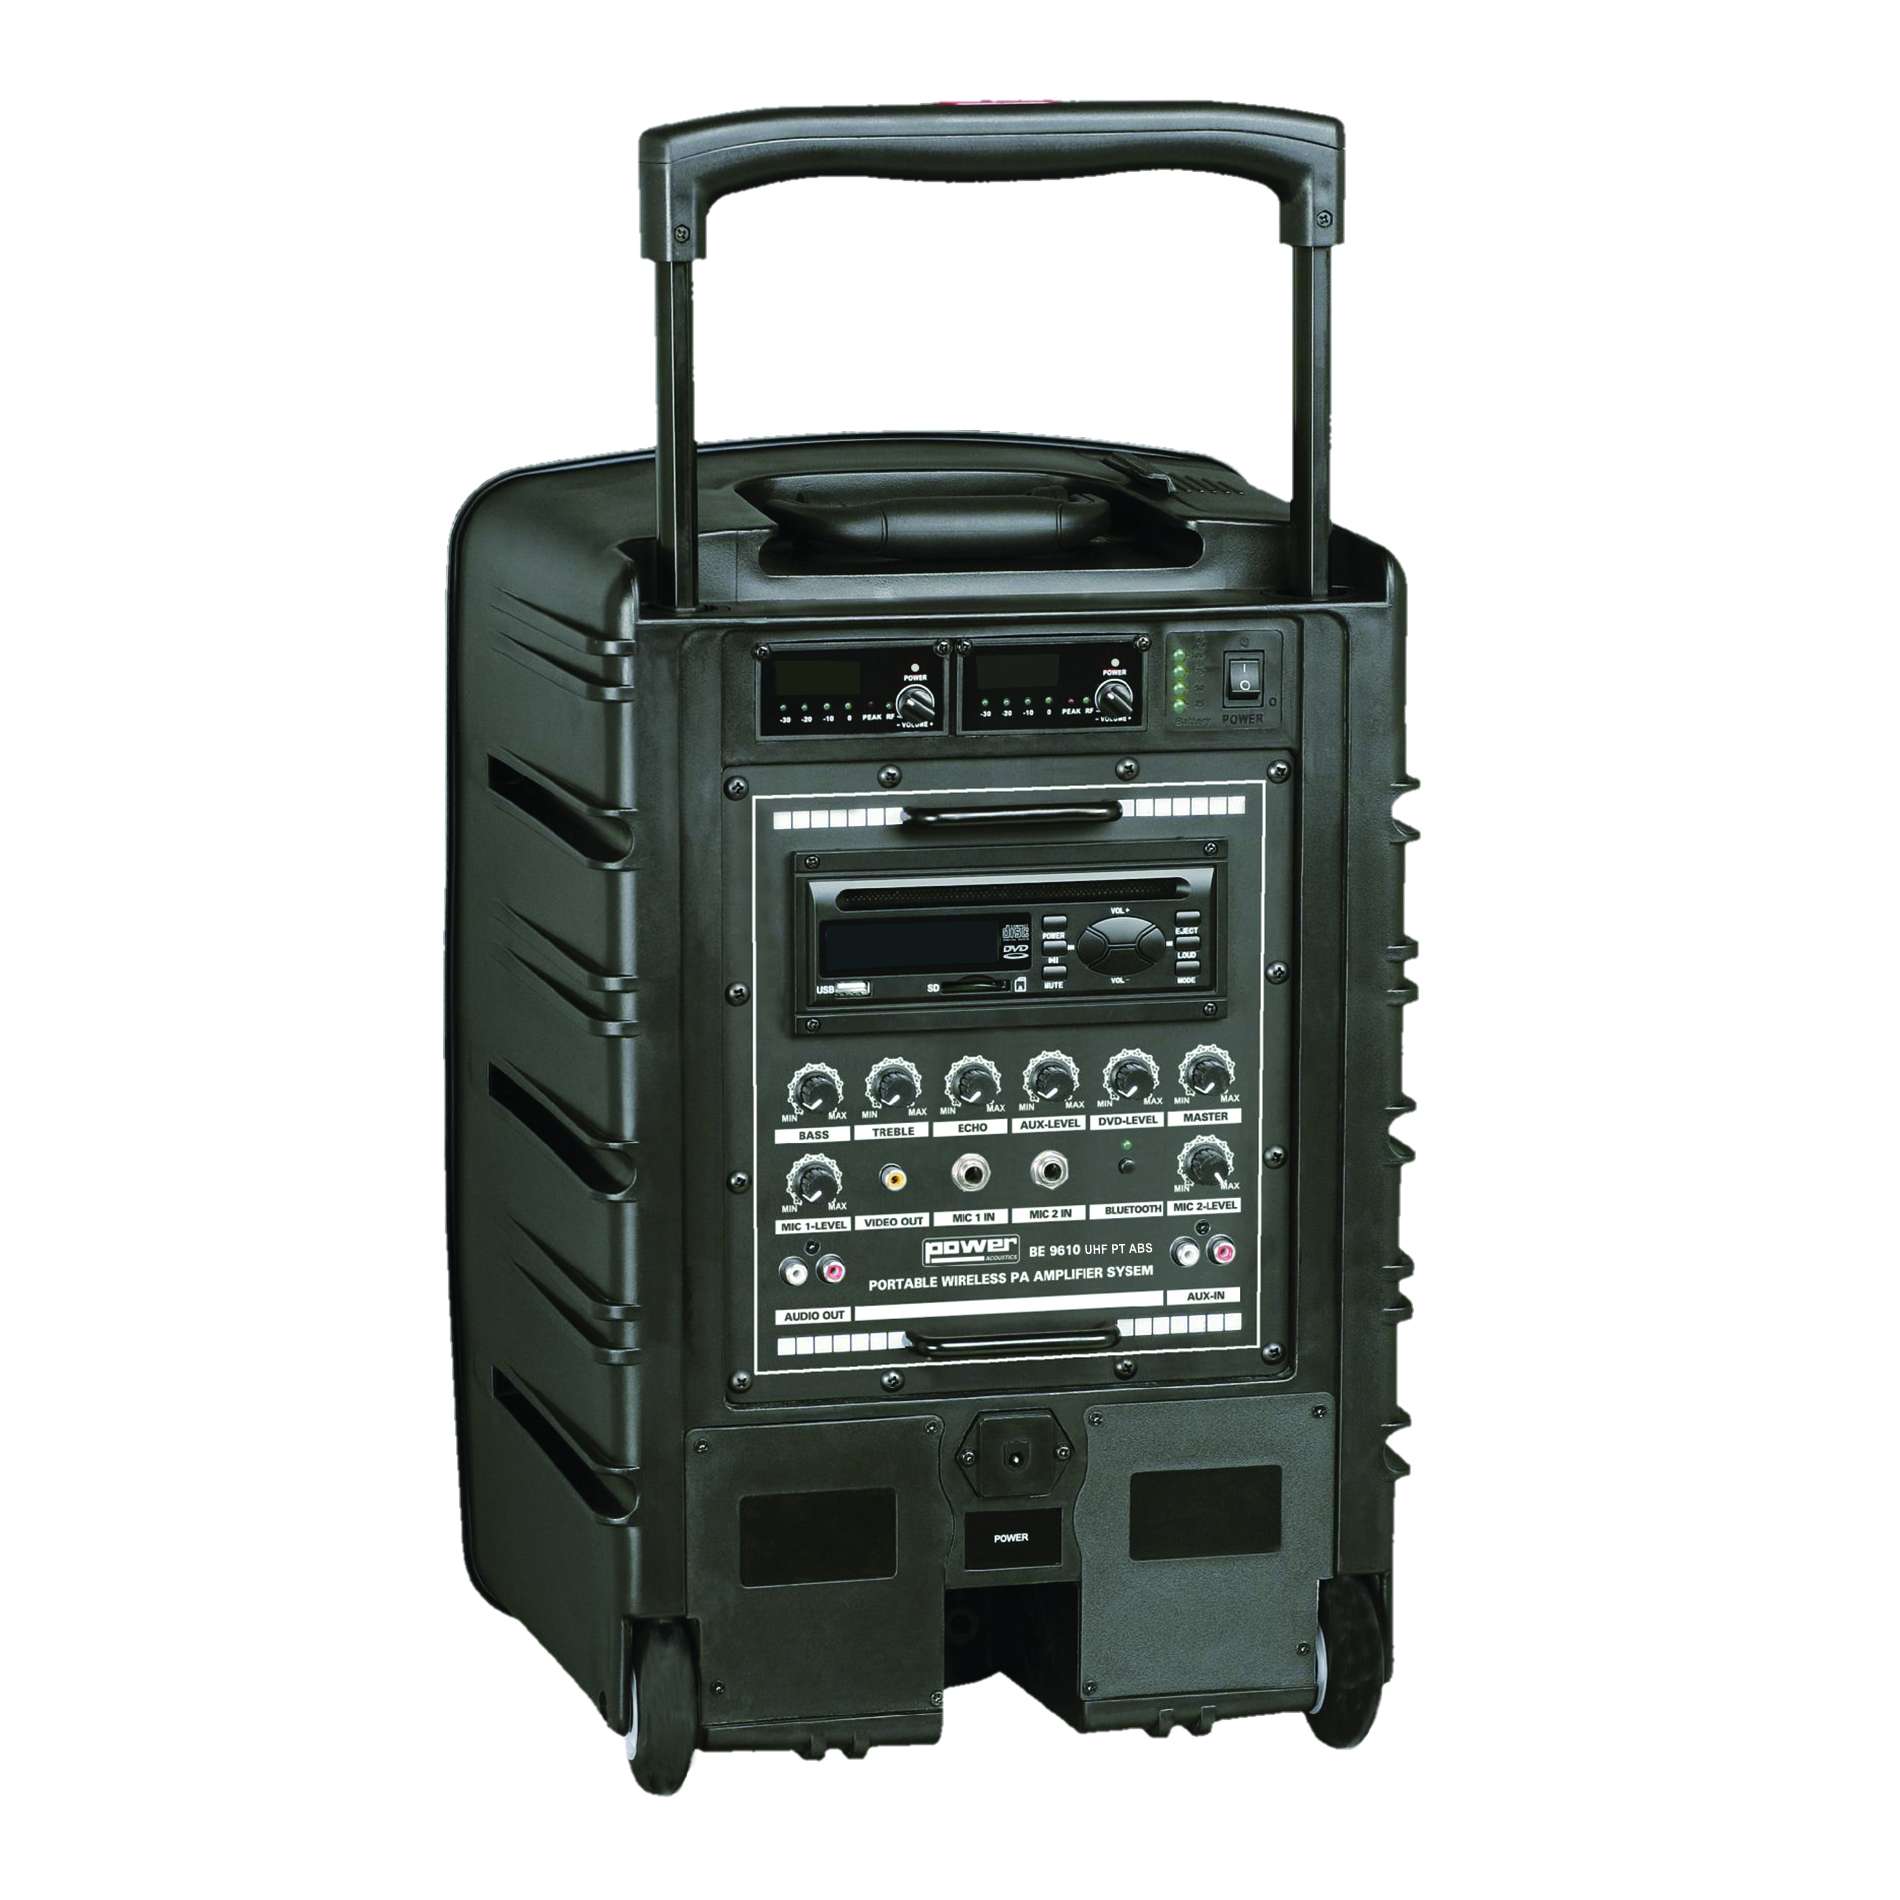 Power Acoustics Be 9610 Uhf Pt Abs - Portable PA system - Variation 1